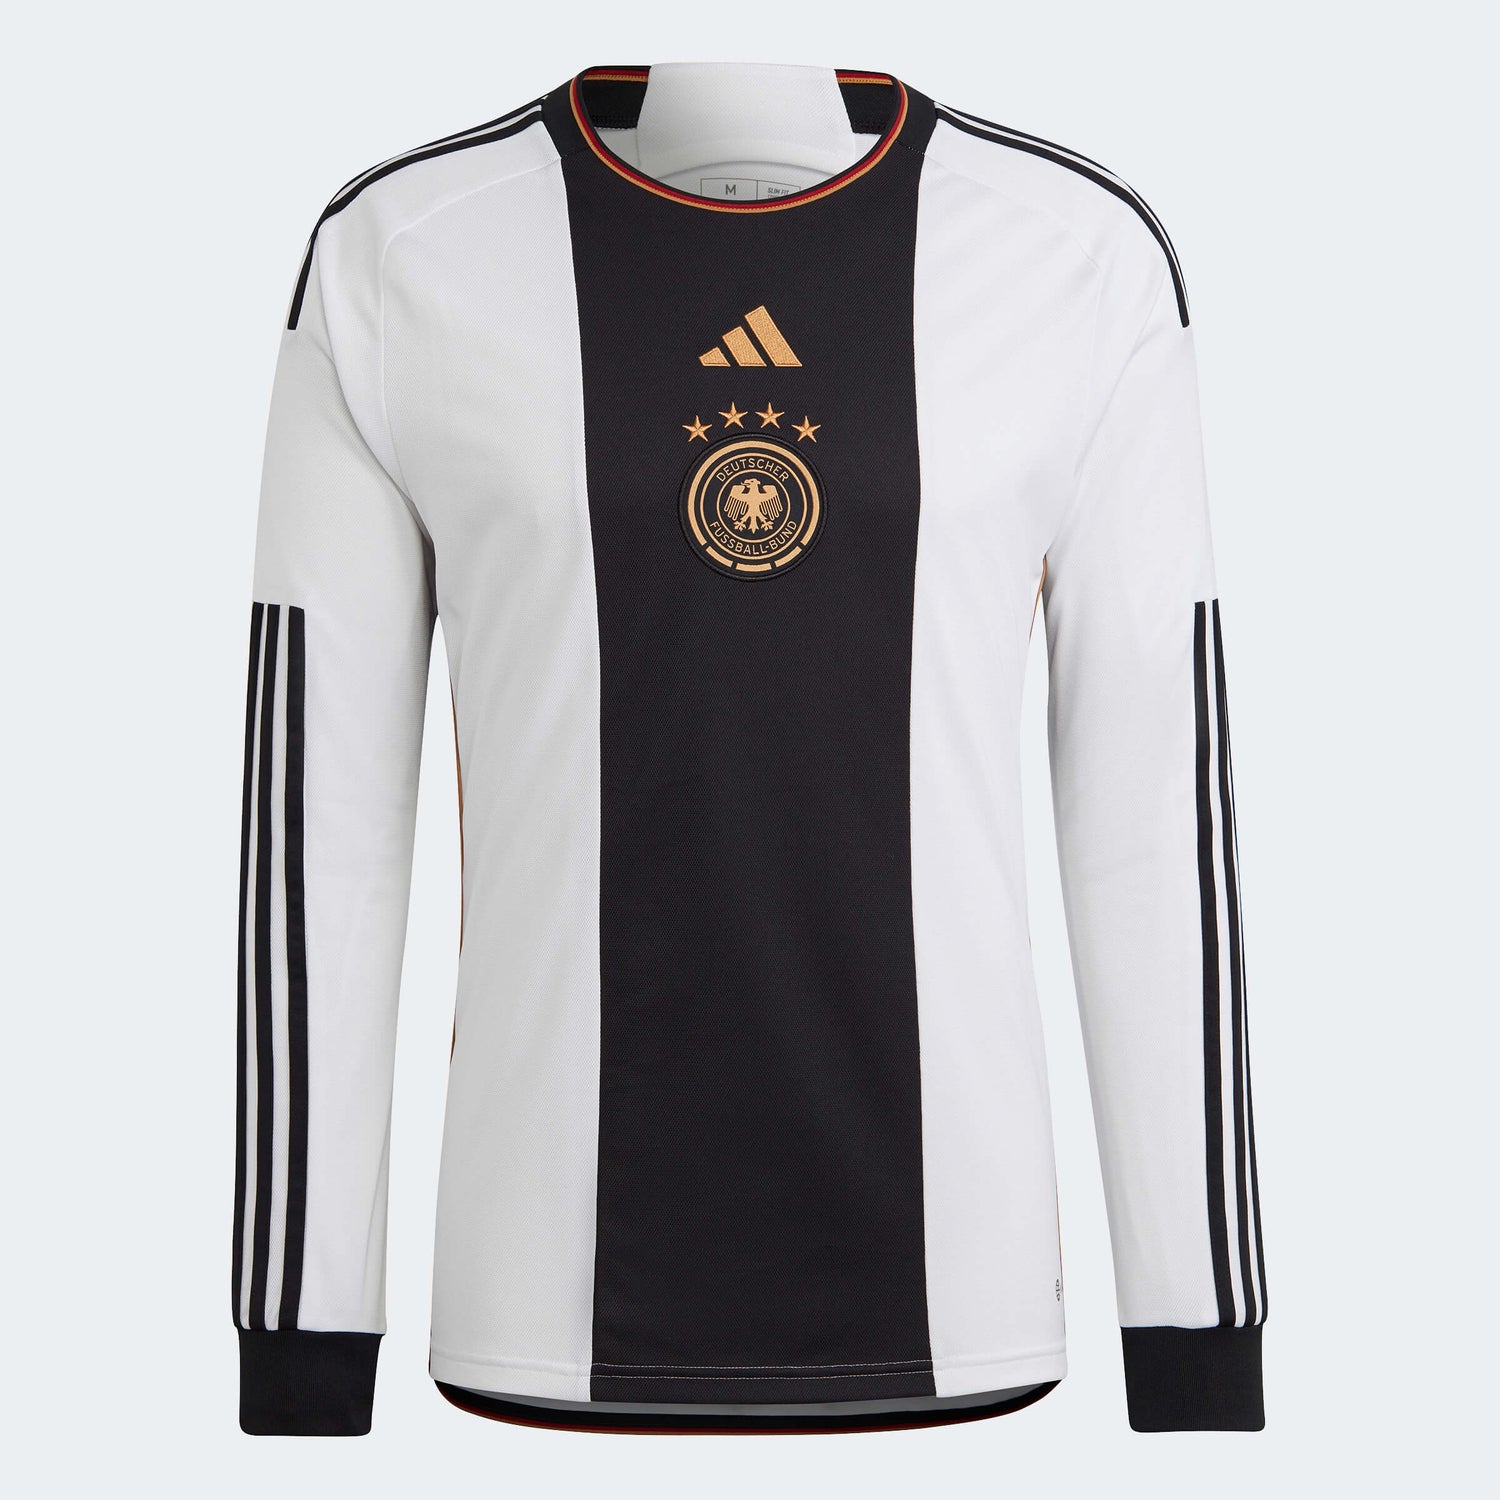 Adidas 2022-23 Germany Home Long Sleeve Jersey White-Black (Front)